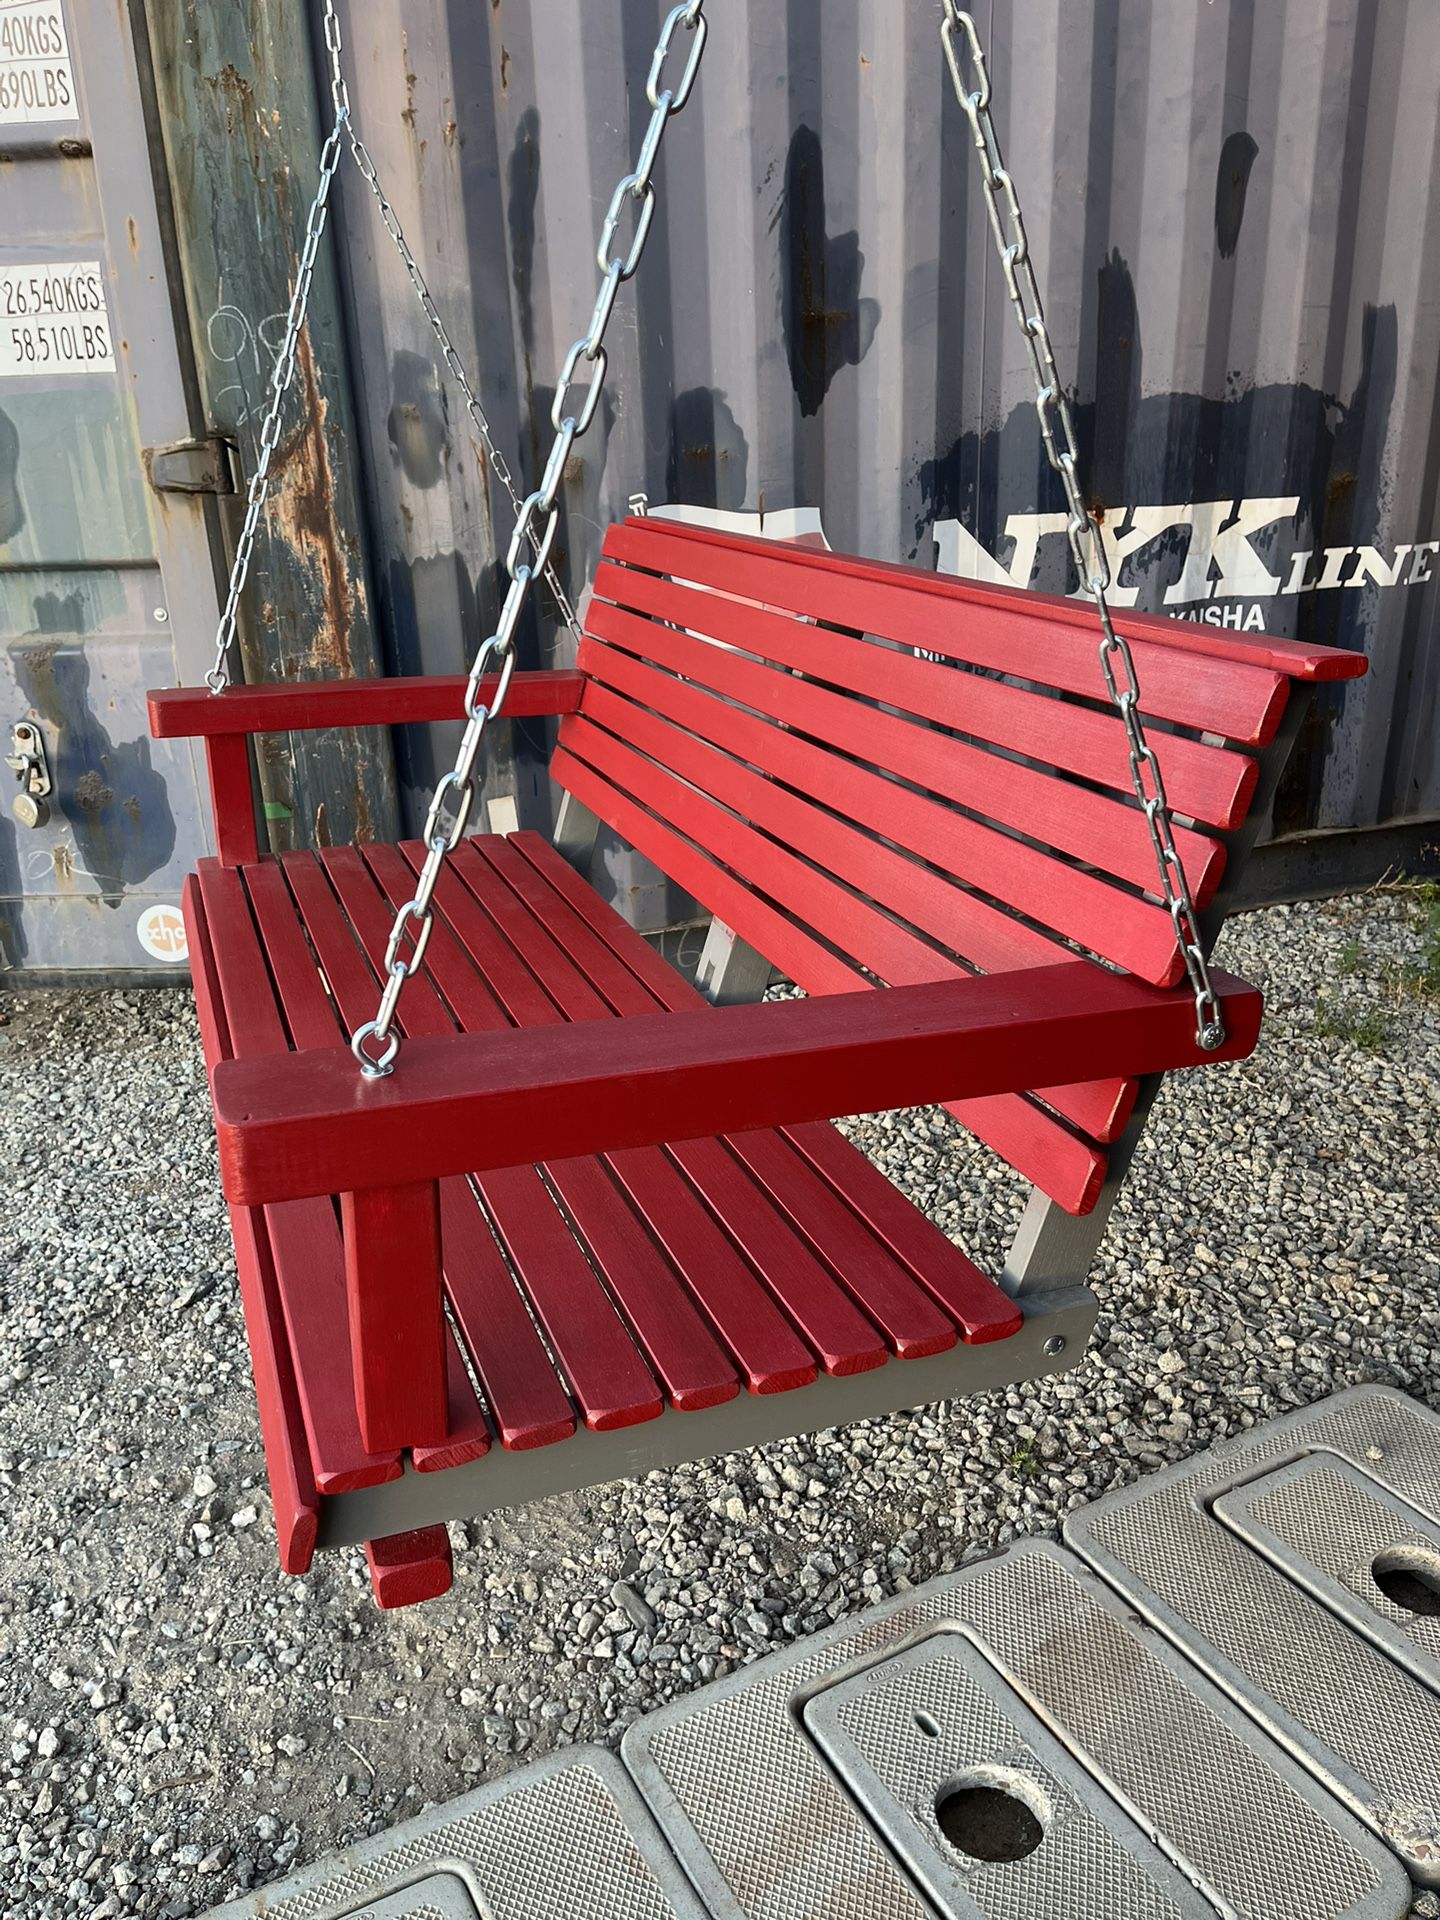 RUSTIC PORCH SWING 48” Colonel Red $280